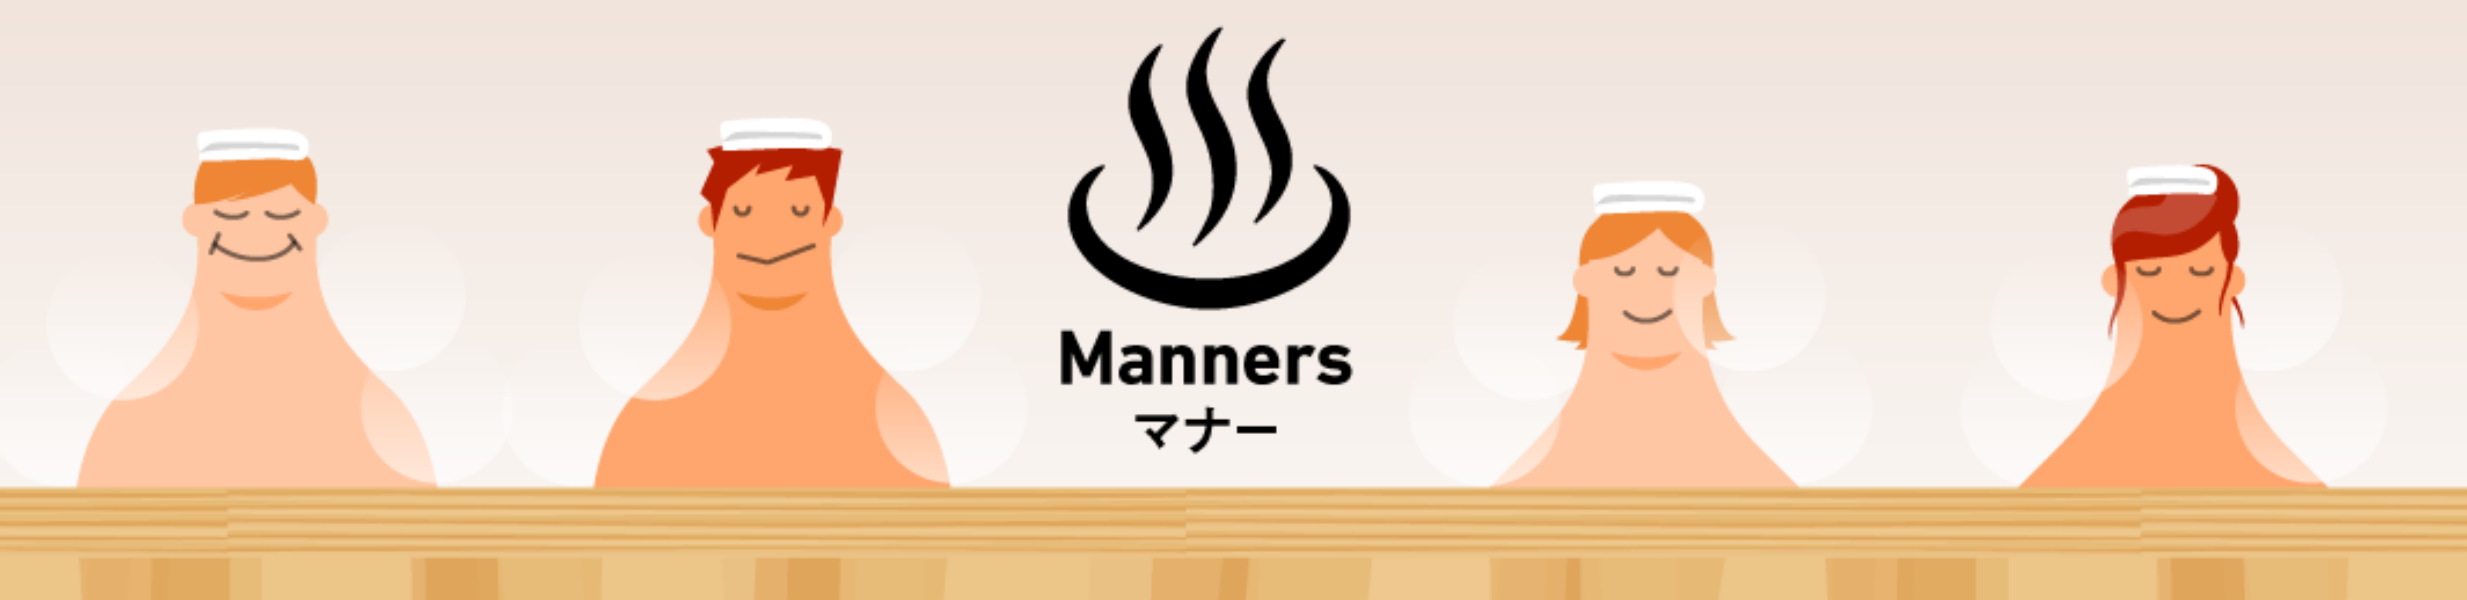 manners banner